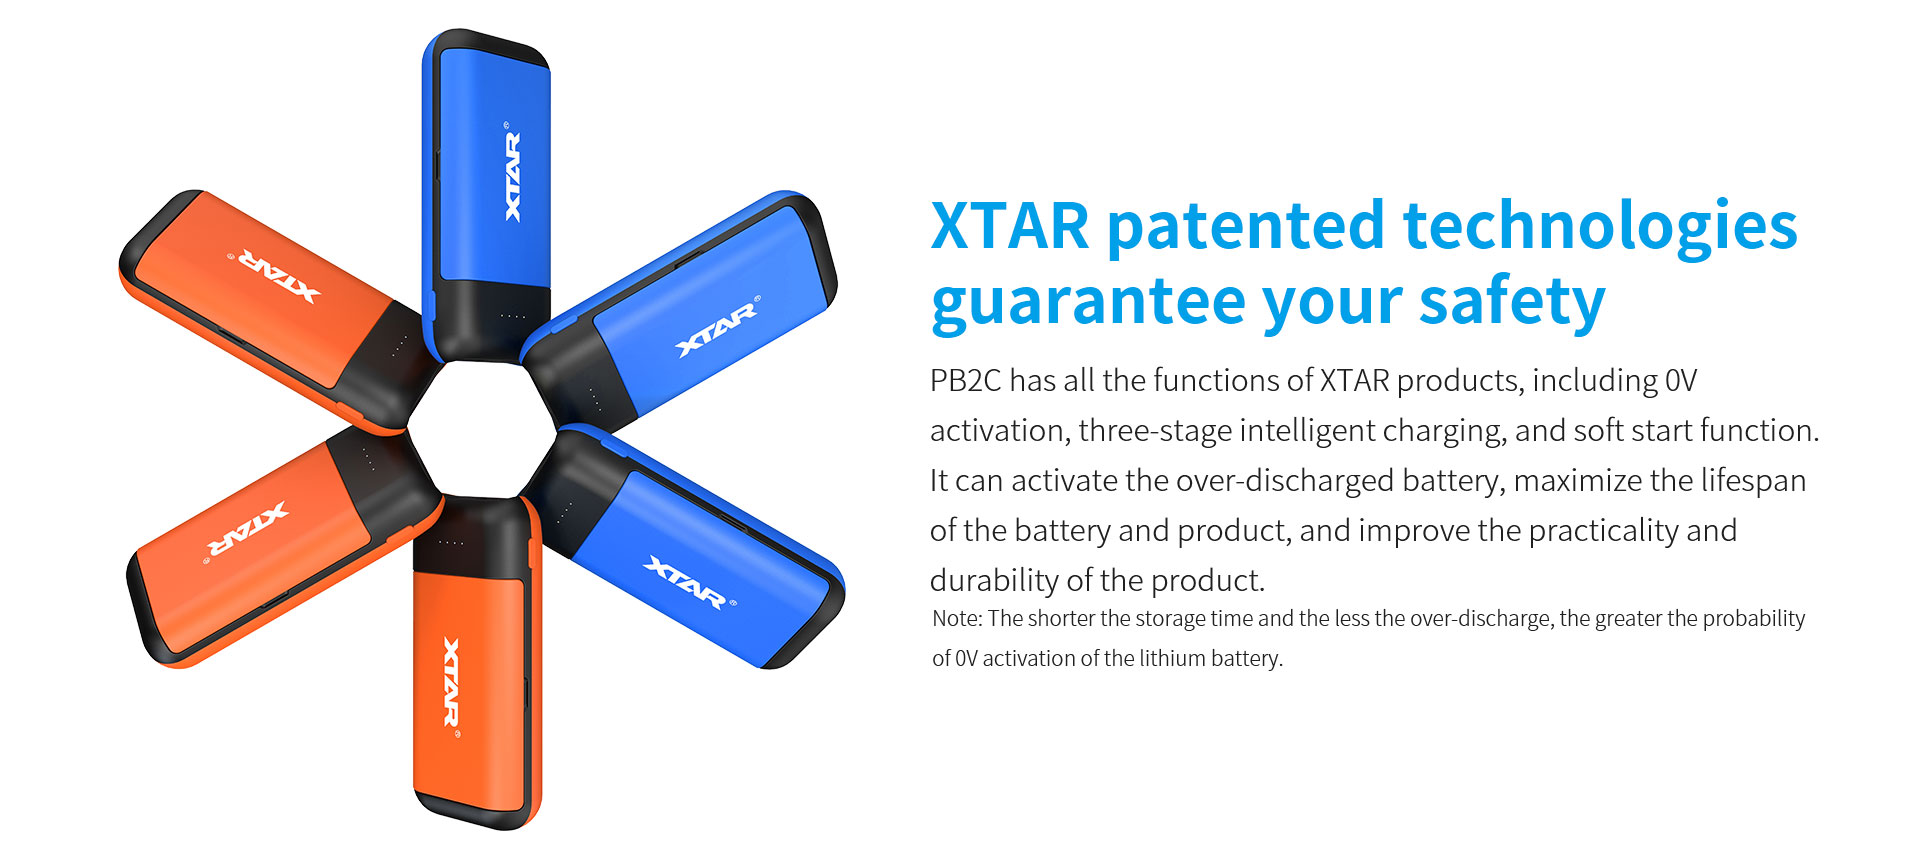 PB2C uses XTAR patented safety technology, such as 0V activation, 3-stage intelligent charging, and soft start charging.